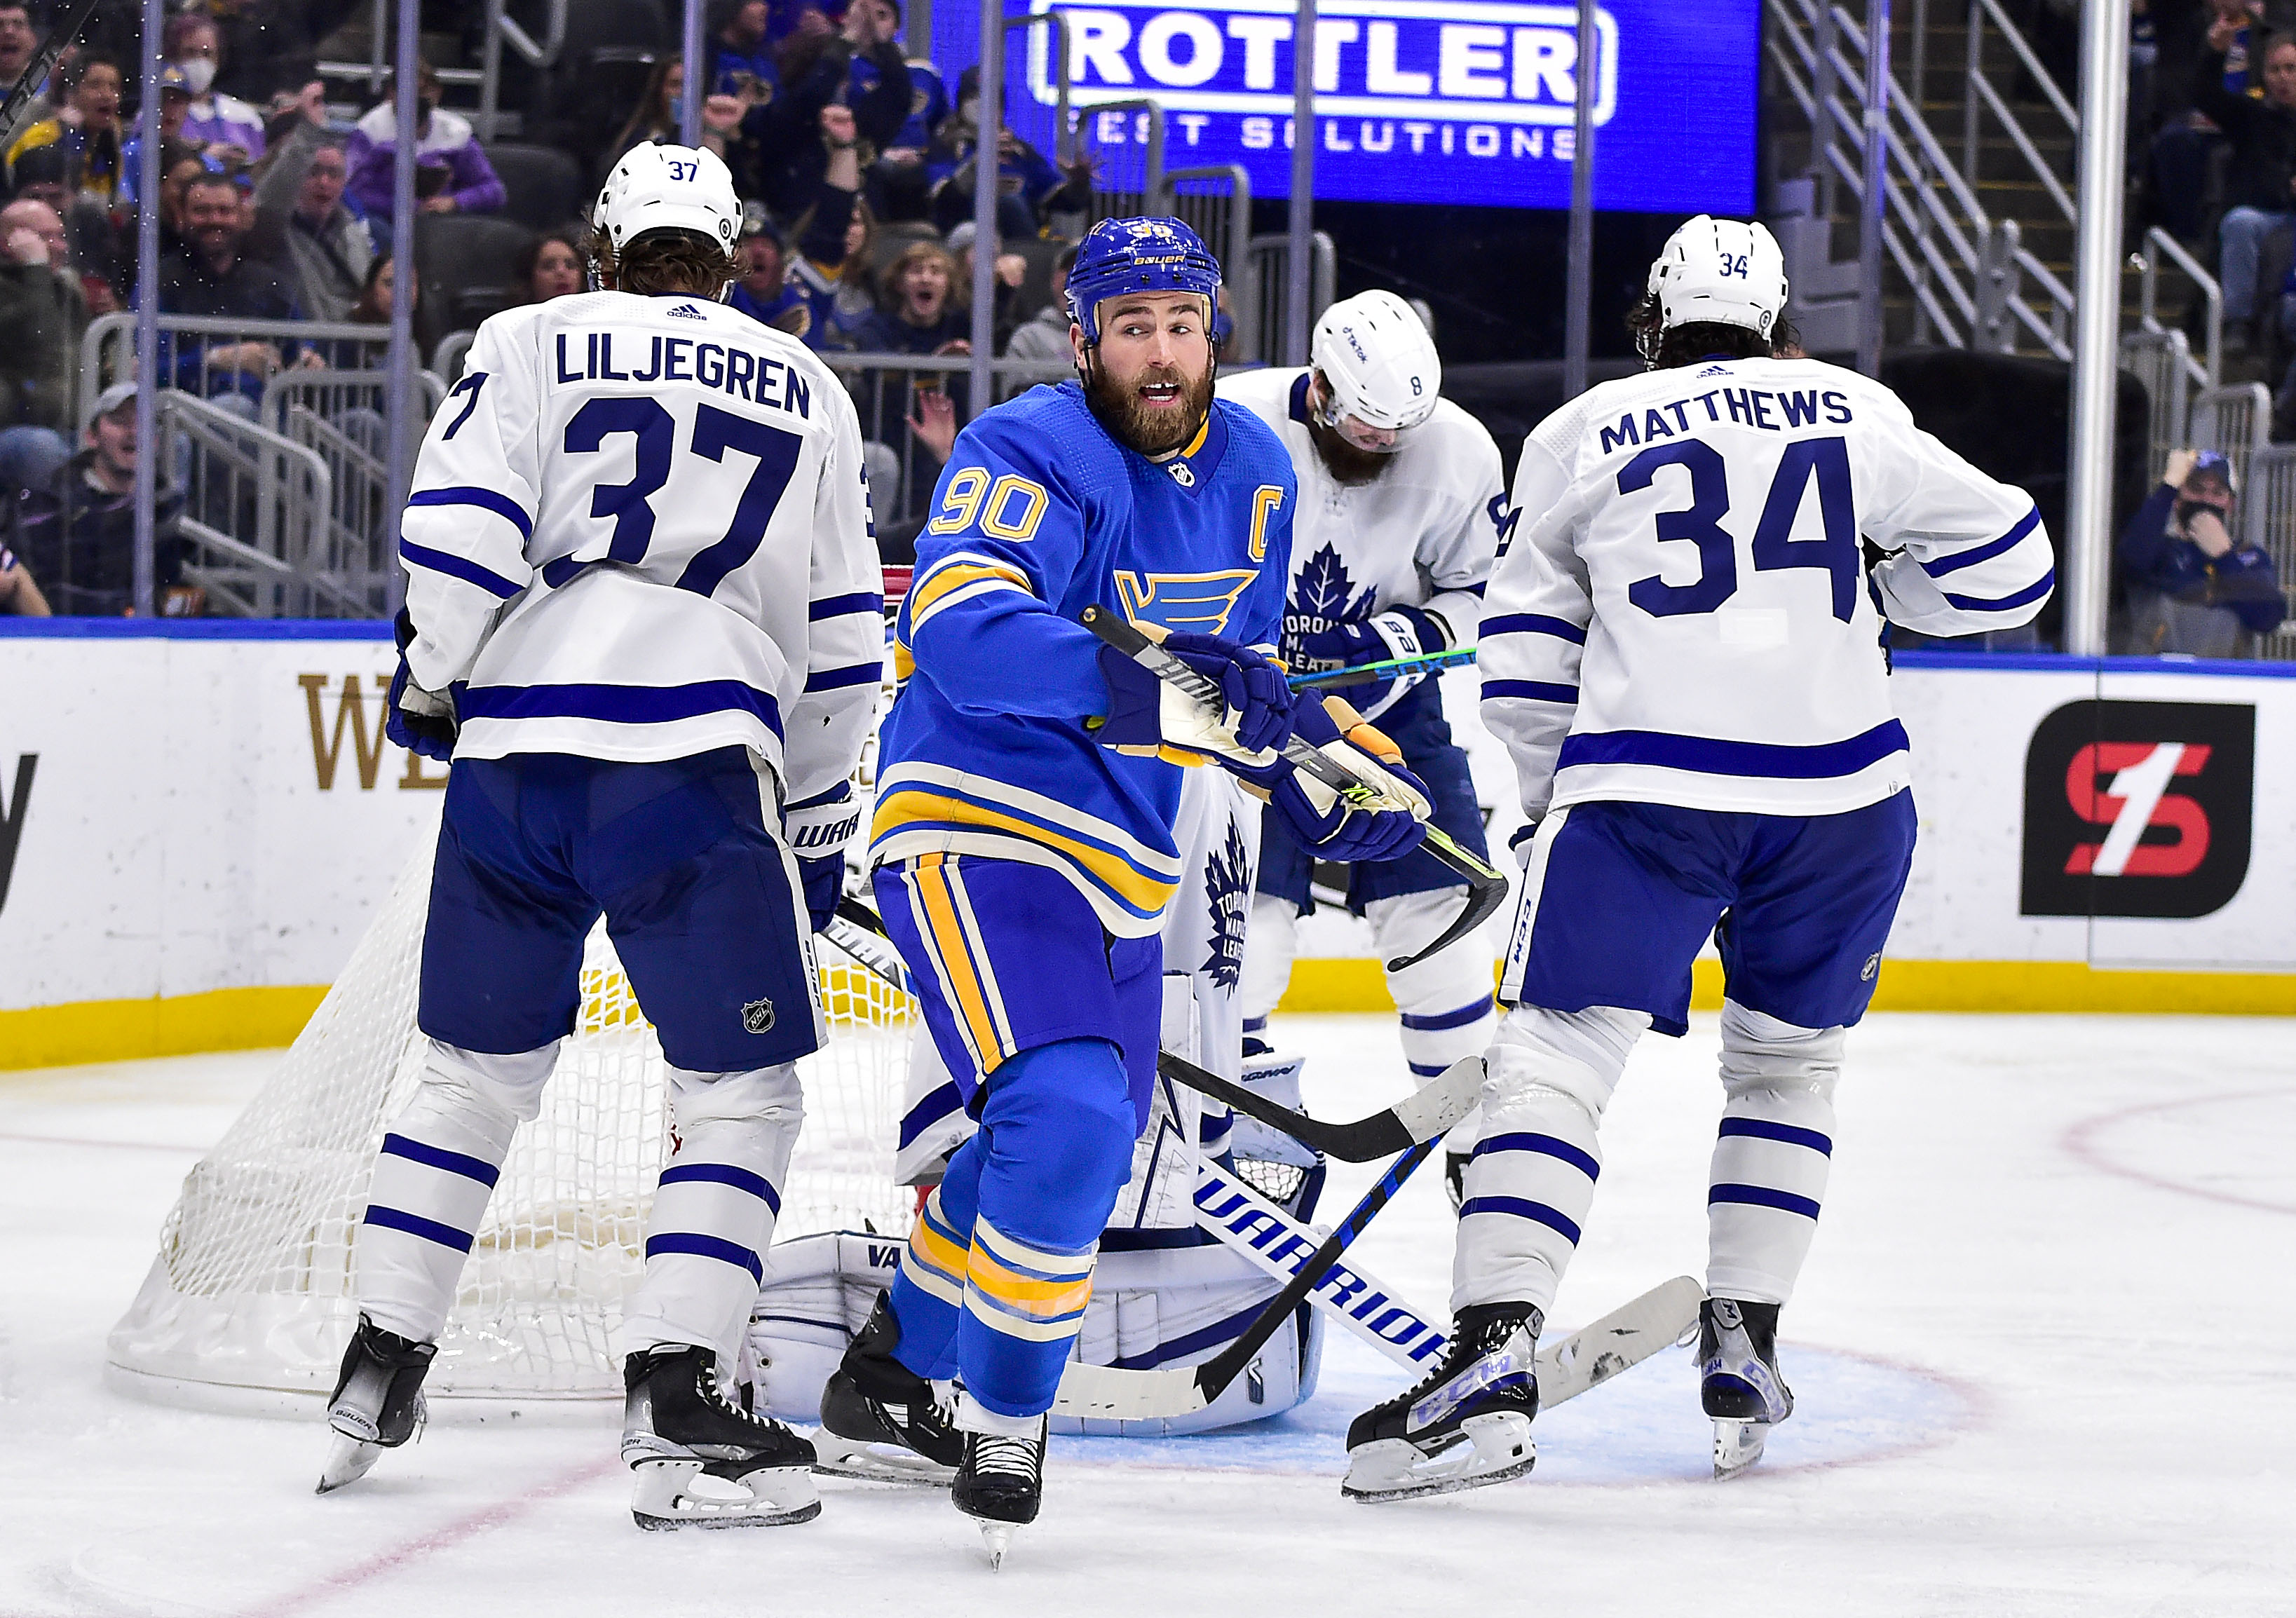 Ryan O'Reilly trade grades: Maple Leafs take worthwhile risk in